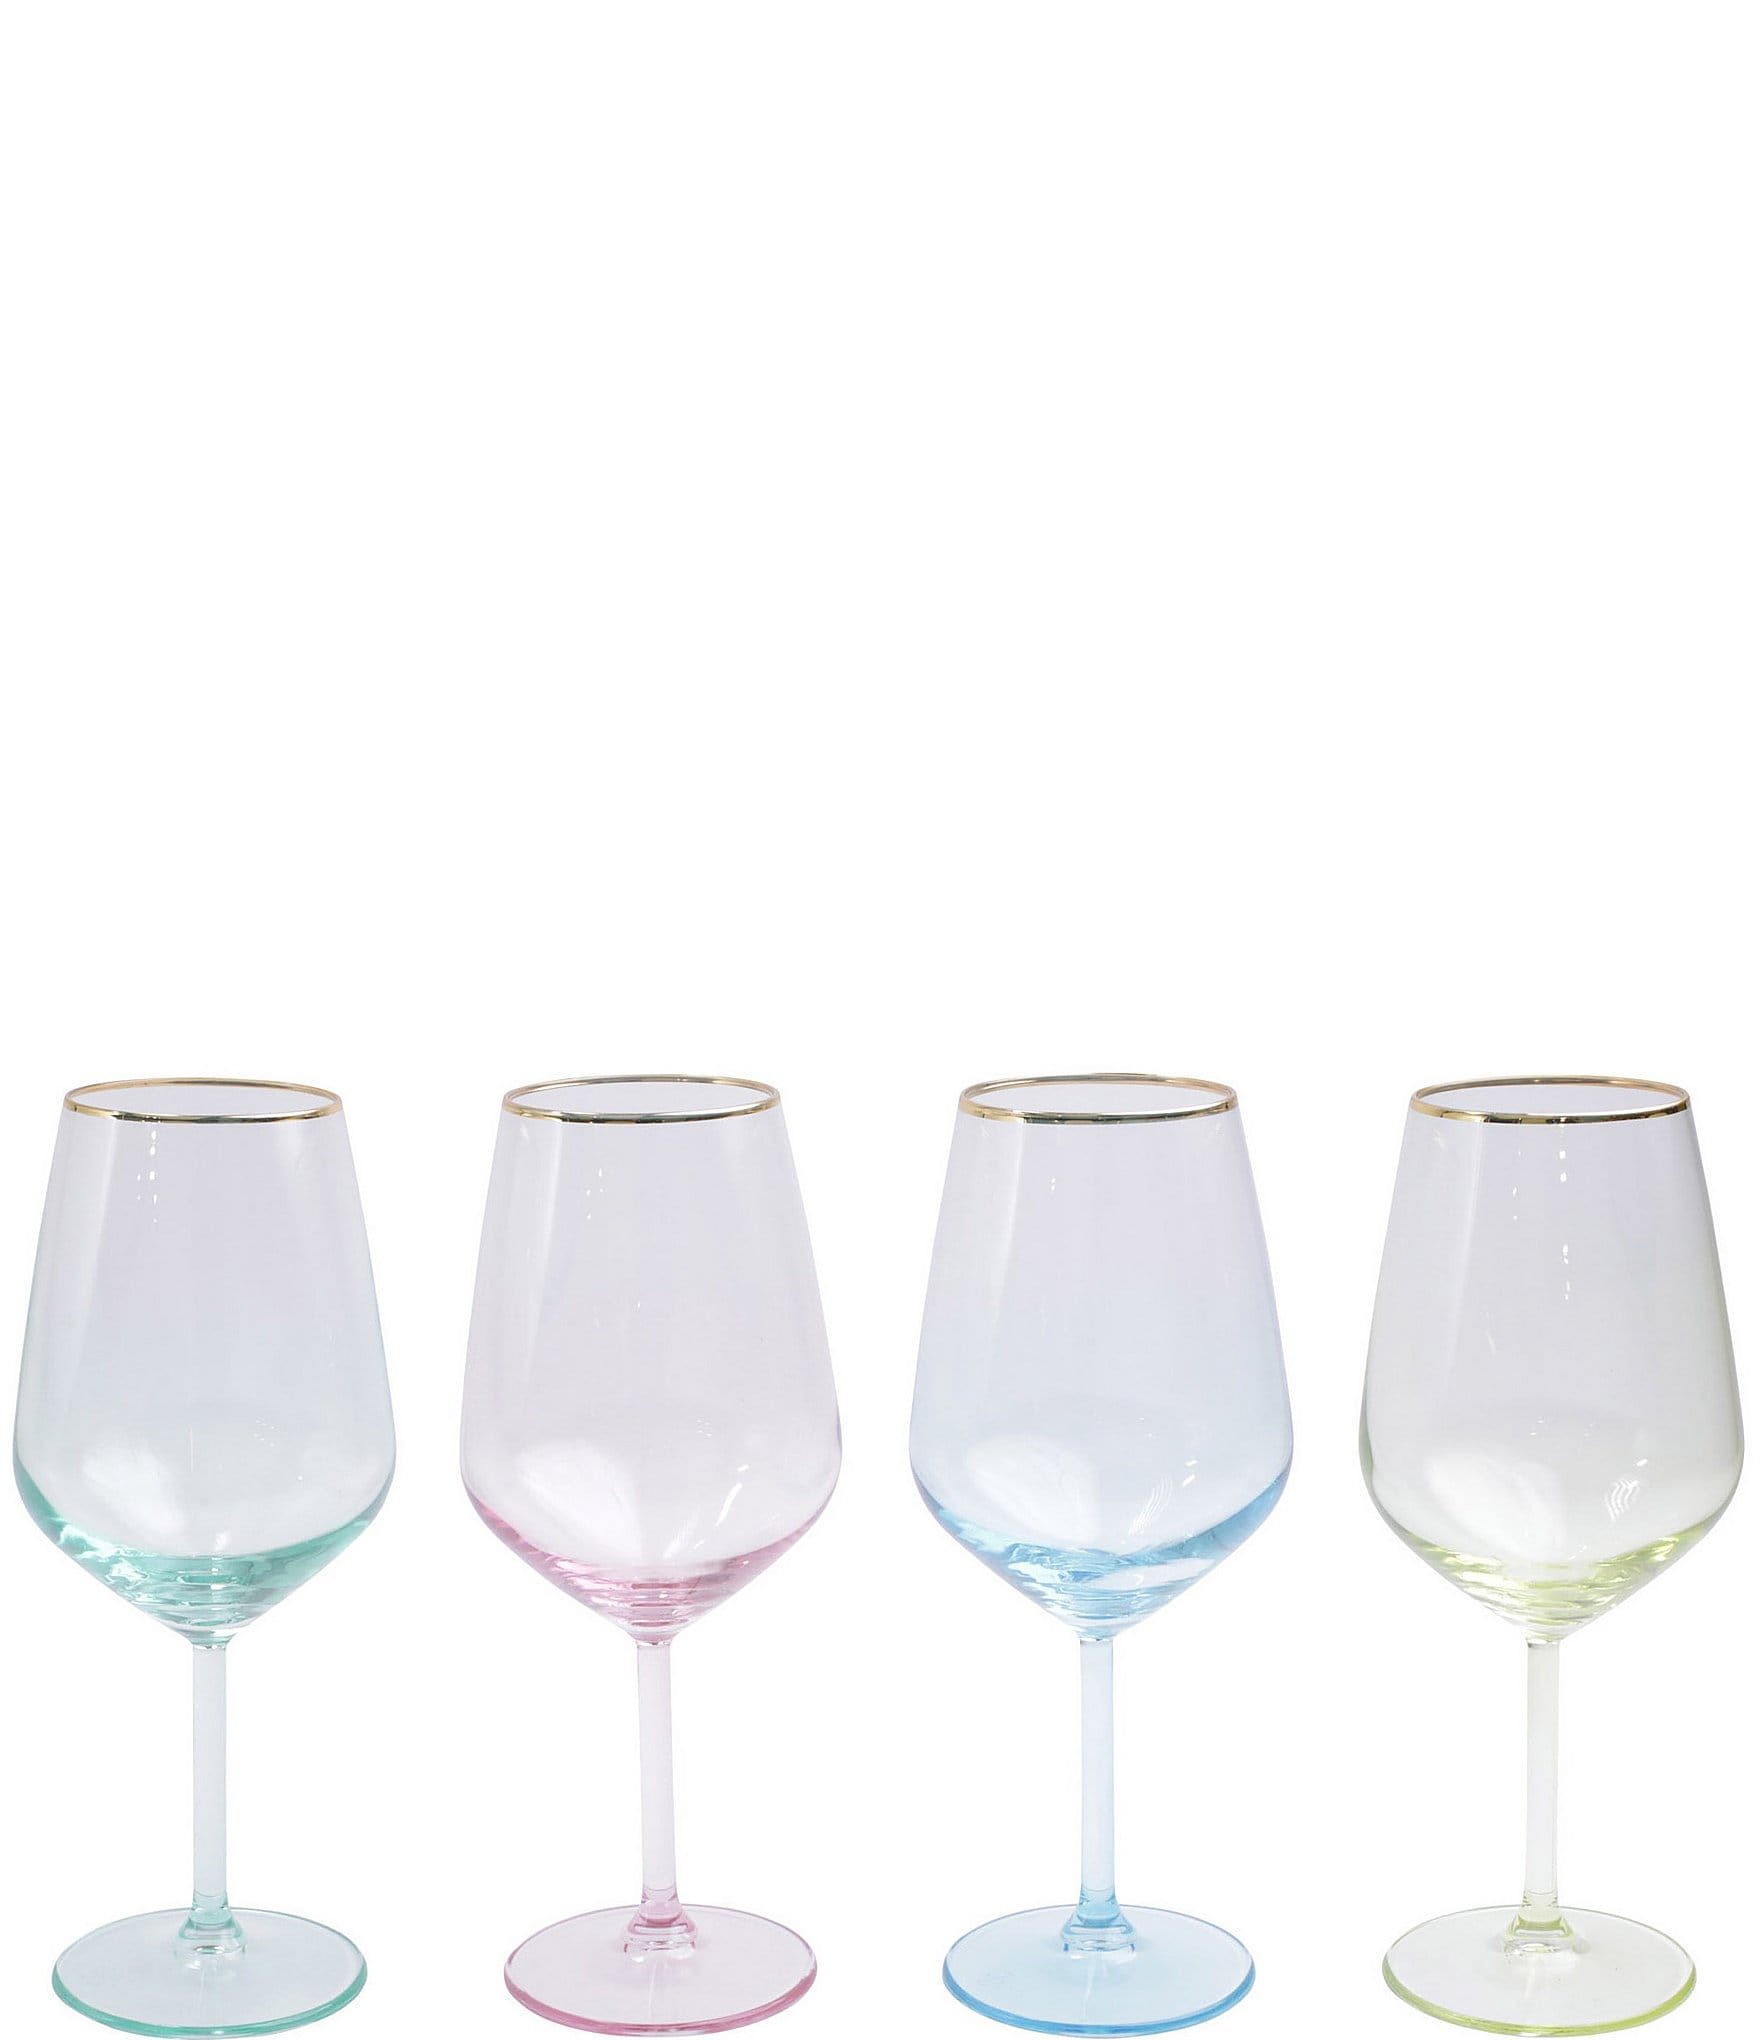 Viva by Vietri Rainbow Coupe Champagne Glass - Green